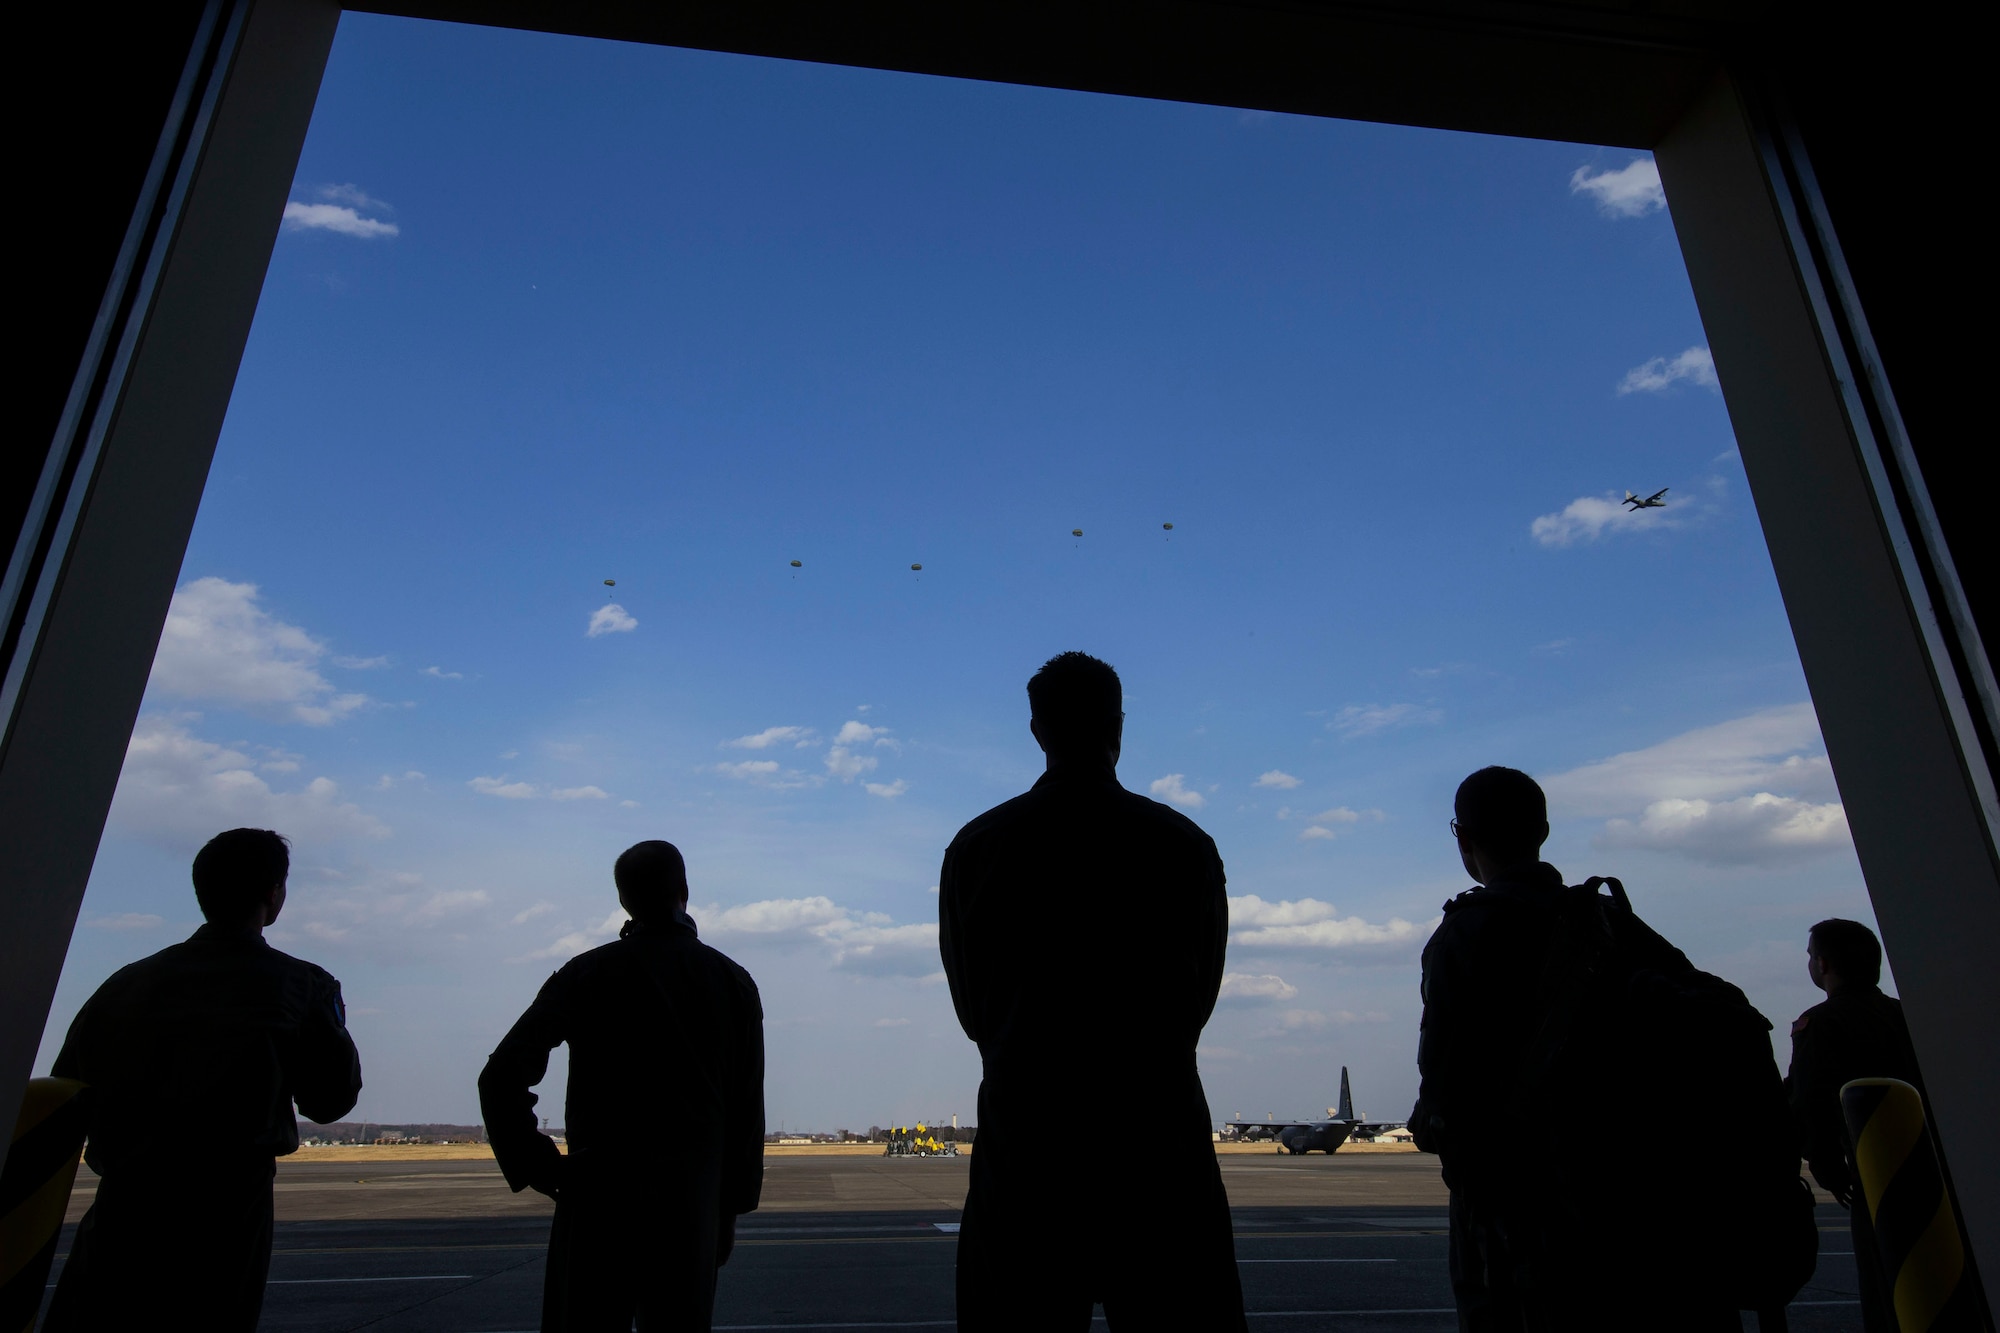 U.S. Air Force aircrews with the 36th Airlift Squadron watch U.S. Marine jumpers descend from an Air Force C-130H Hercules at Yokota Air Base, Japan, March 23, 2017, during jump week. The training not only allowed the Marines to practice jumping, but it also allowed the Yokota aircrews to practice flight tactics and timed-package drops. (U.S. Air Force photo by Yasuo Osakabe)